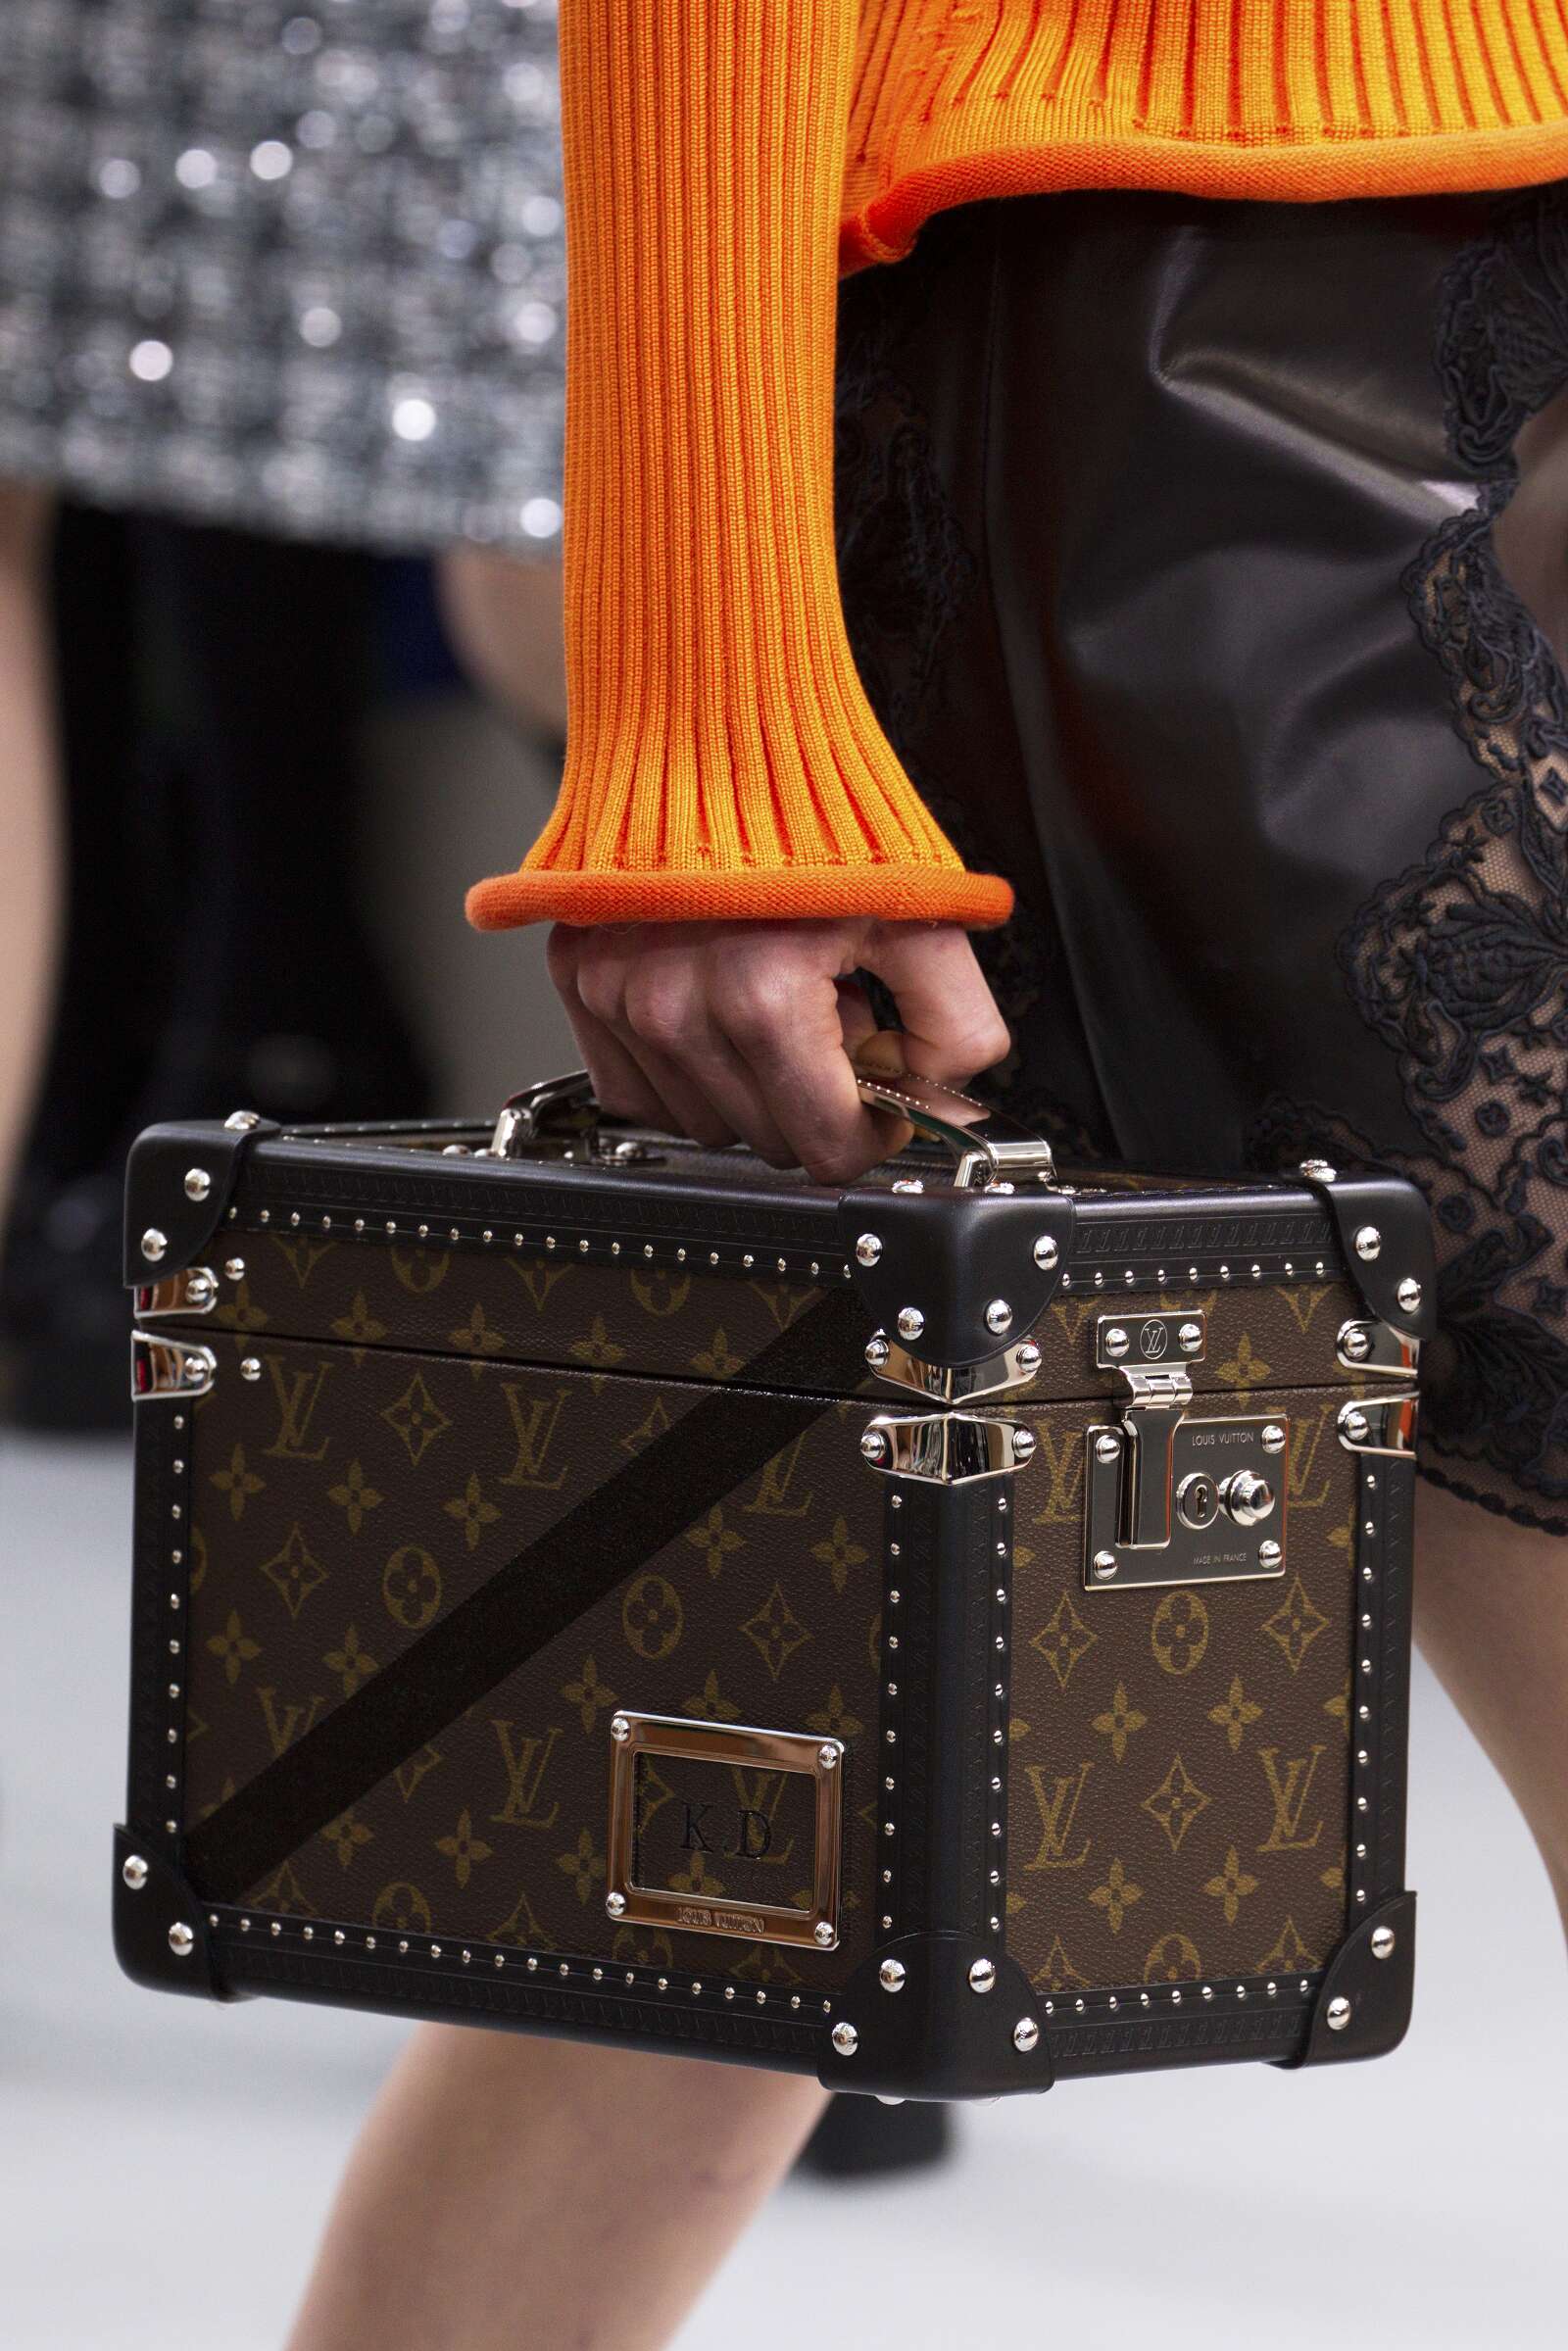 LOUIS VUITTON FALL WINTER 2015-16 WOMEN’S COLLECTION DETAILS | The Skinny Beep